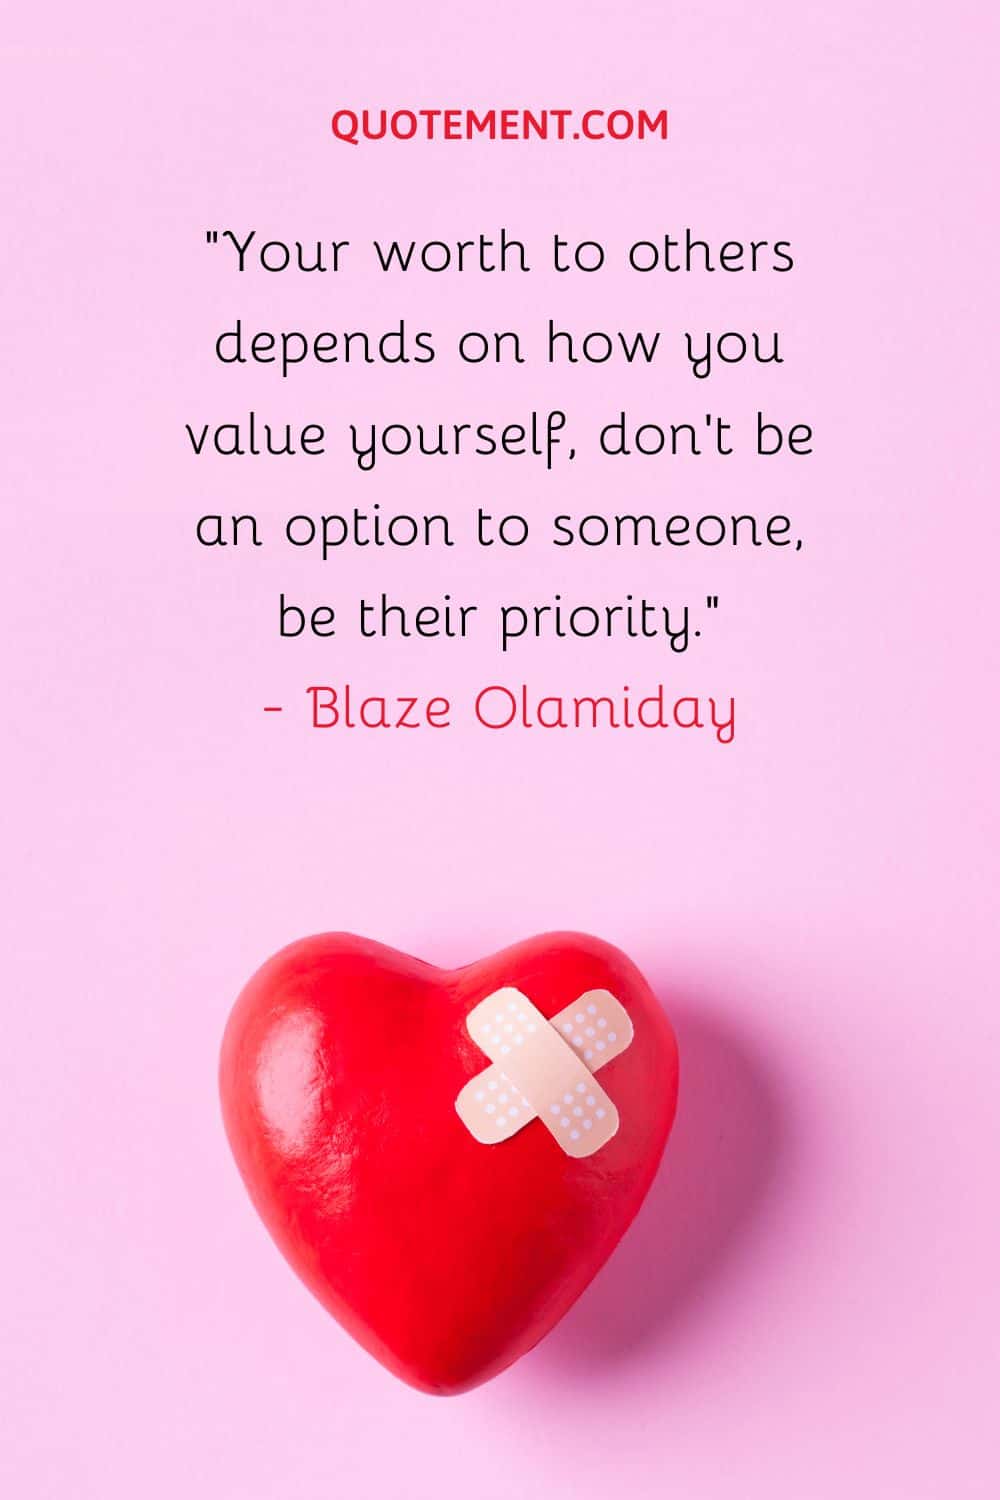 you are my priority quotes